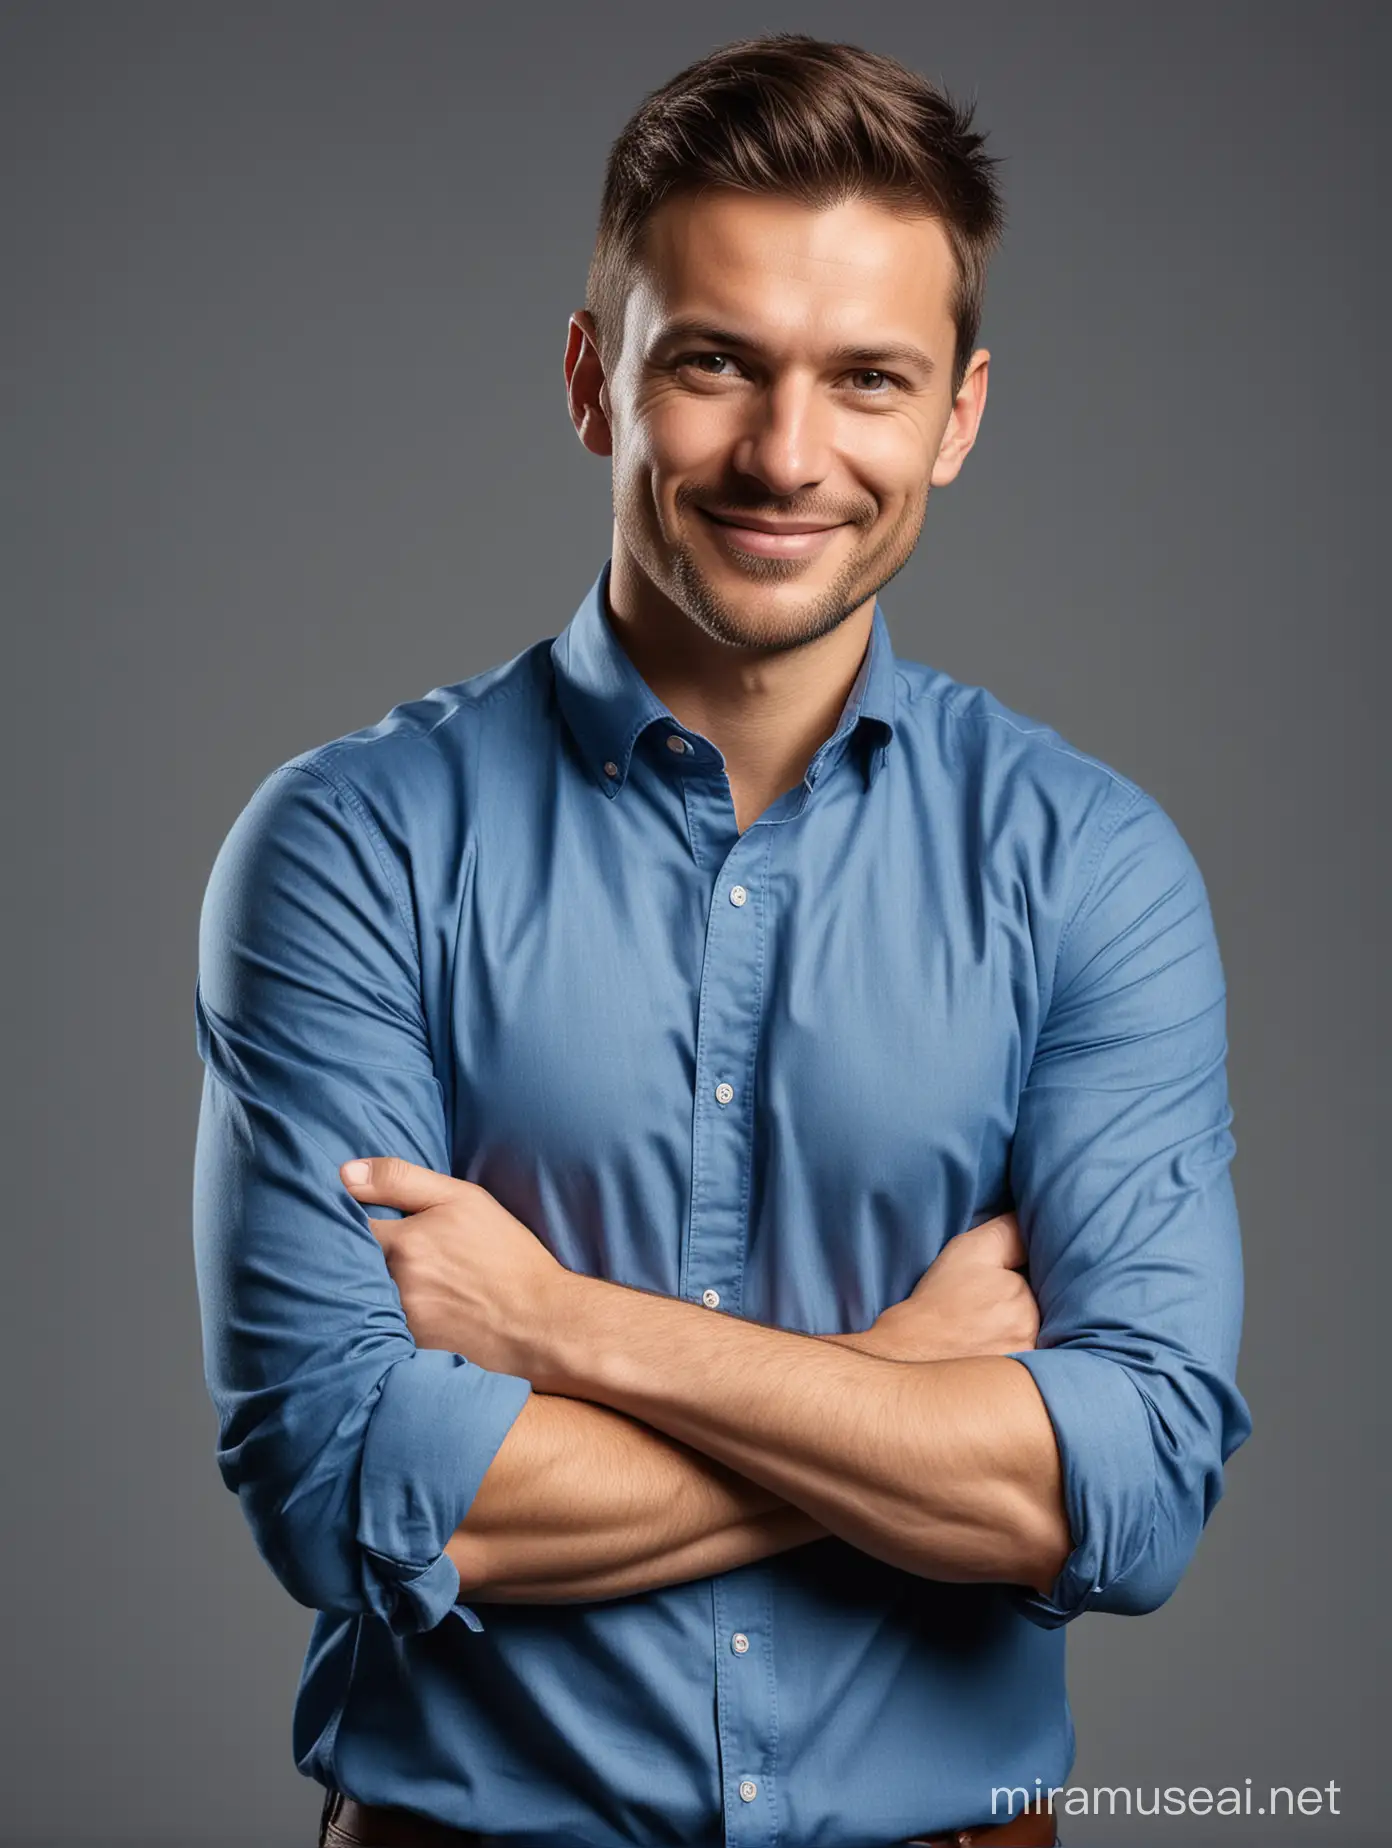 Confident Polish Man in Blue Shirt with Crossed Arms